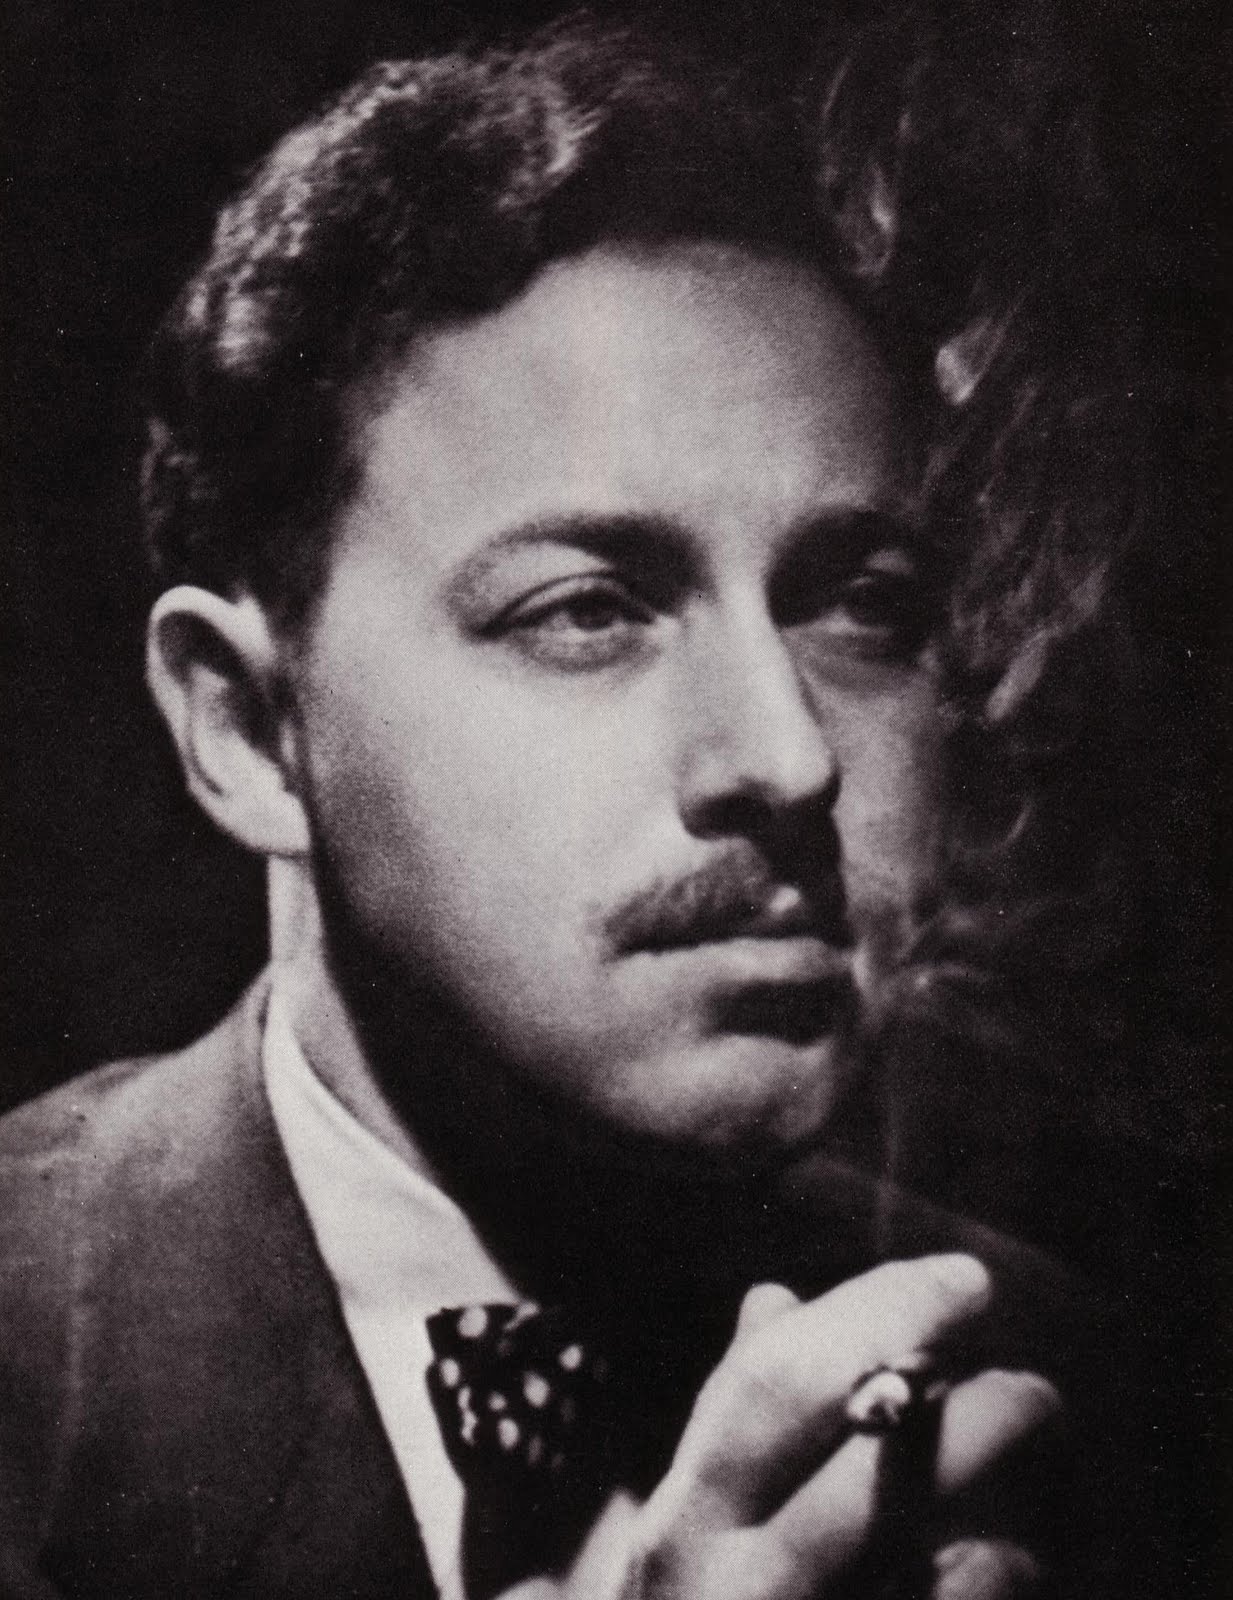 Good portrait of author and playwright Tennessee Williams 